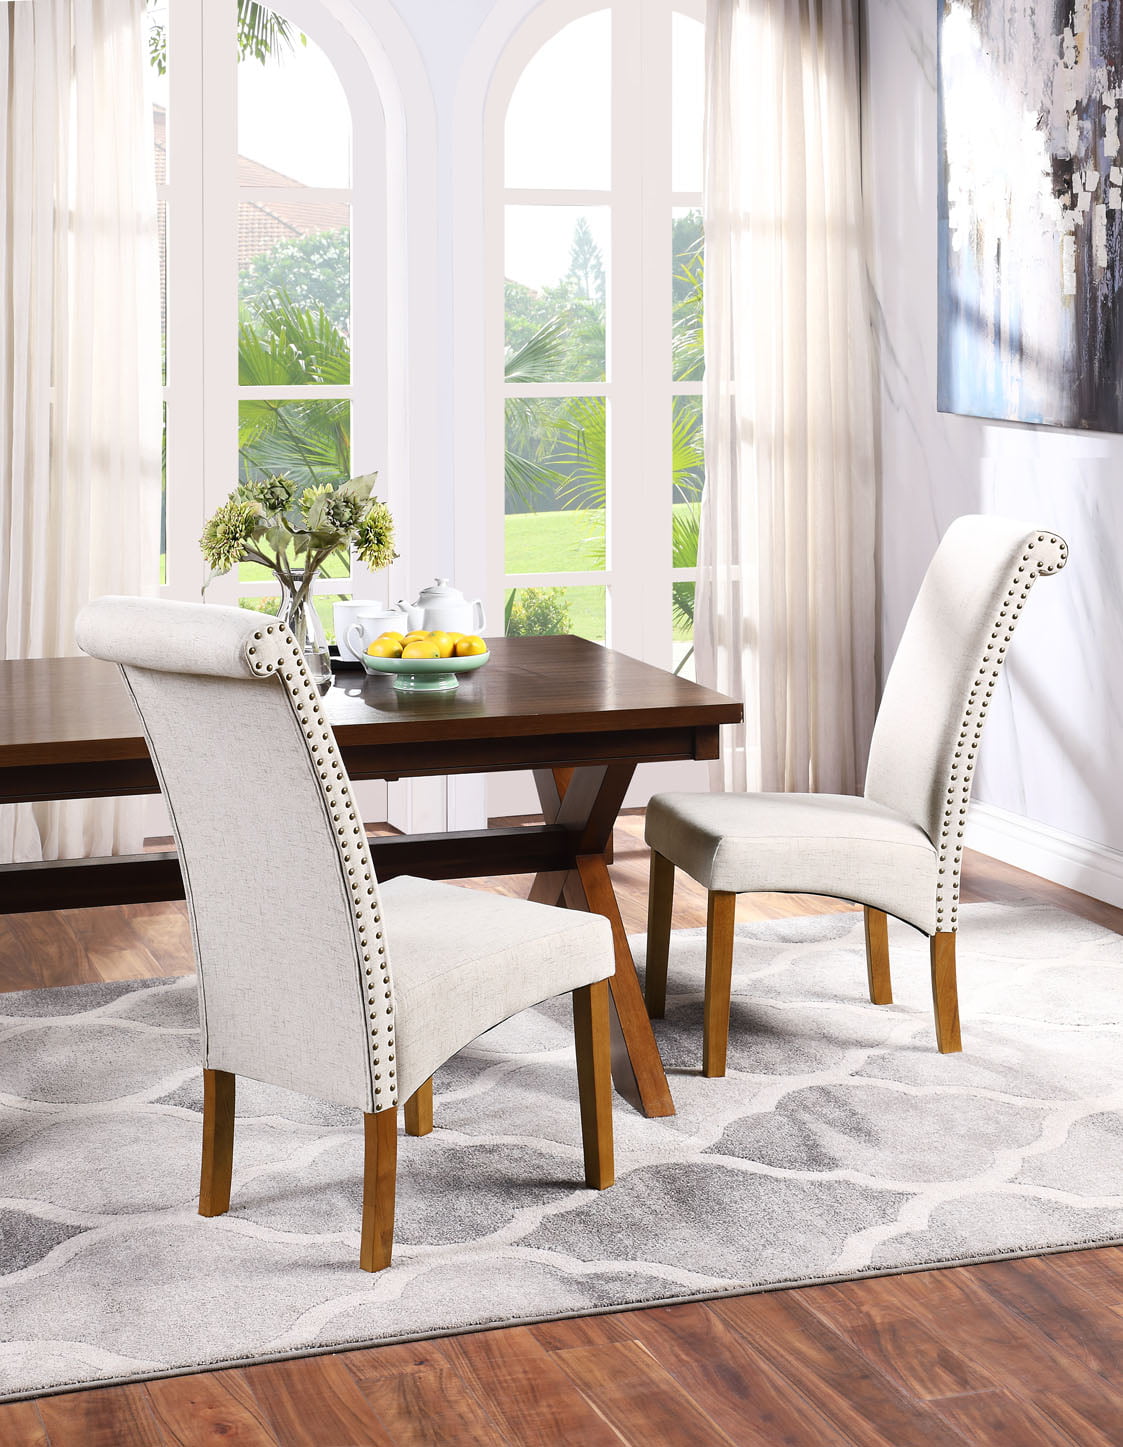 Dining Chairs Upholstered Dining Chairs Set Of 6 Modern Parson Side Chair Kitchen Chairs For Dining Room High Back Fabric Padded Dining Side Chair W Solid Wood Legs Nailhead Trim Beige R220